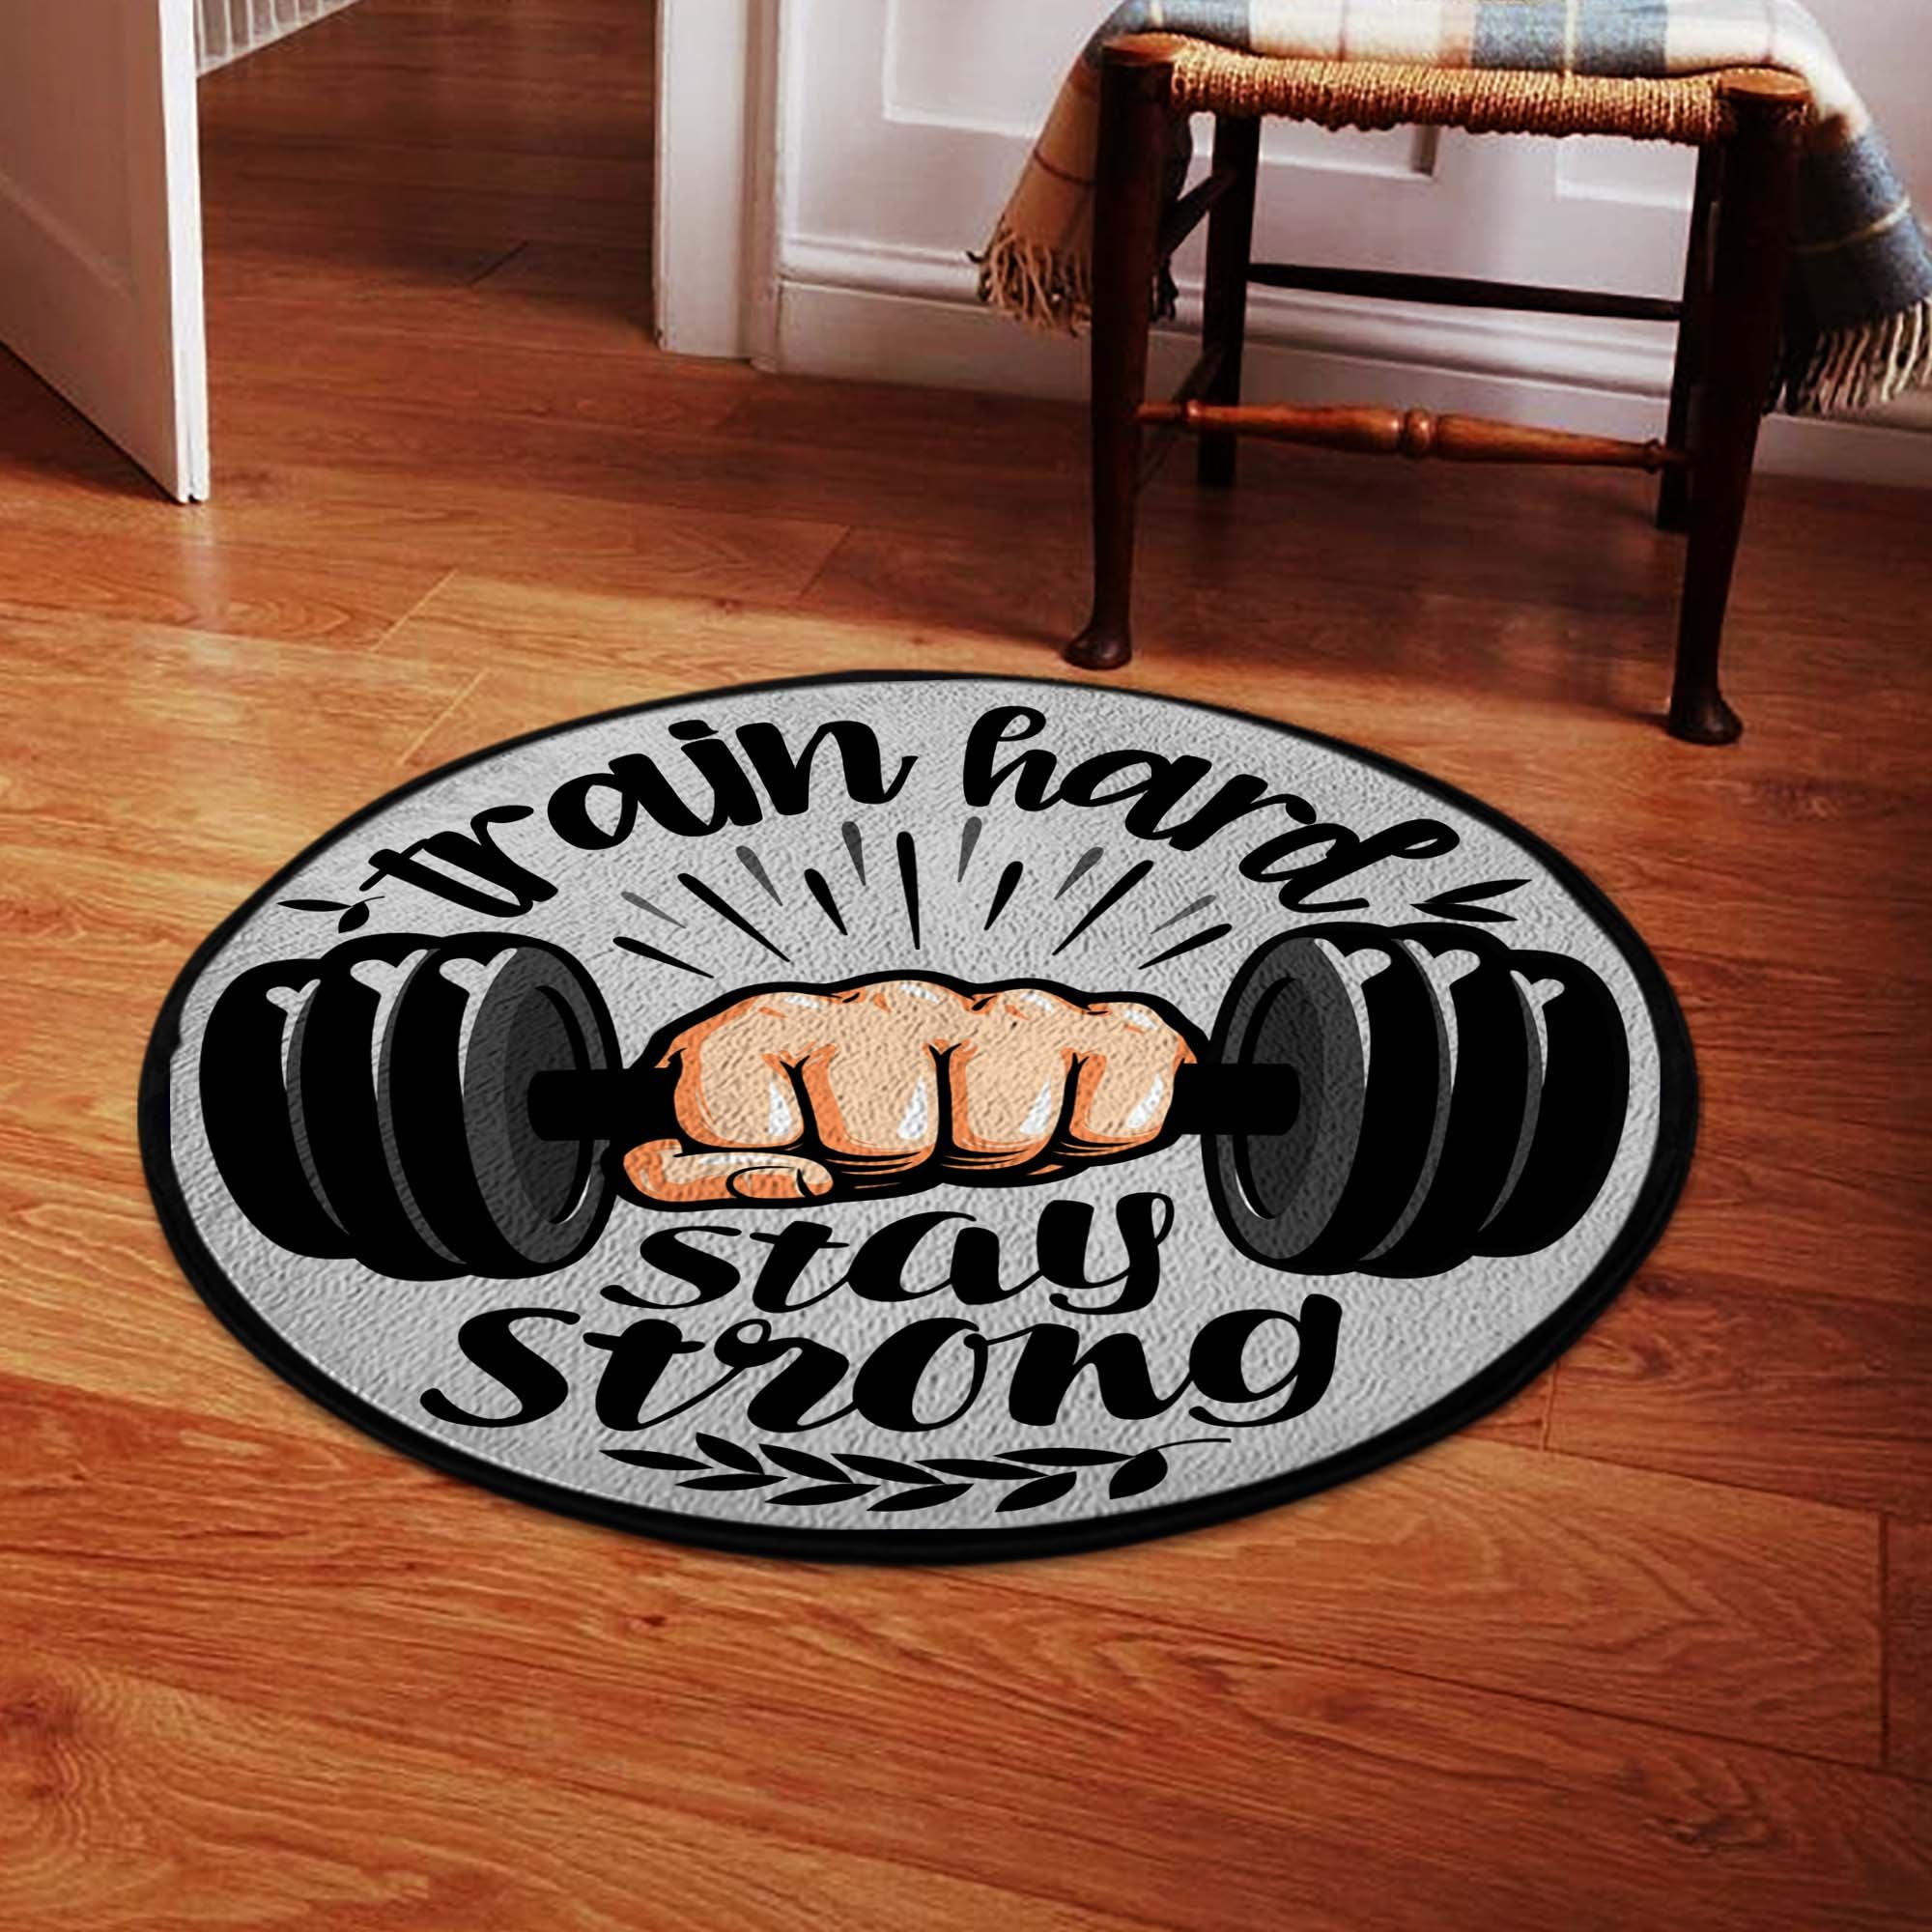 Bodybuilding Home Gym Decor Train Hard Stay Strong Round Rug, Carpet